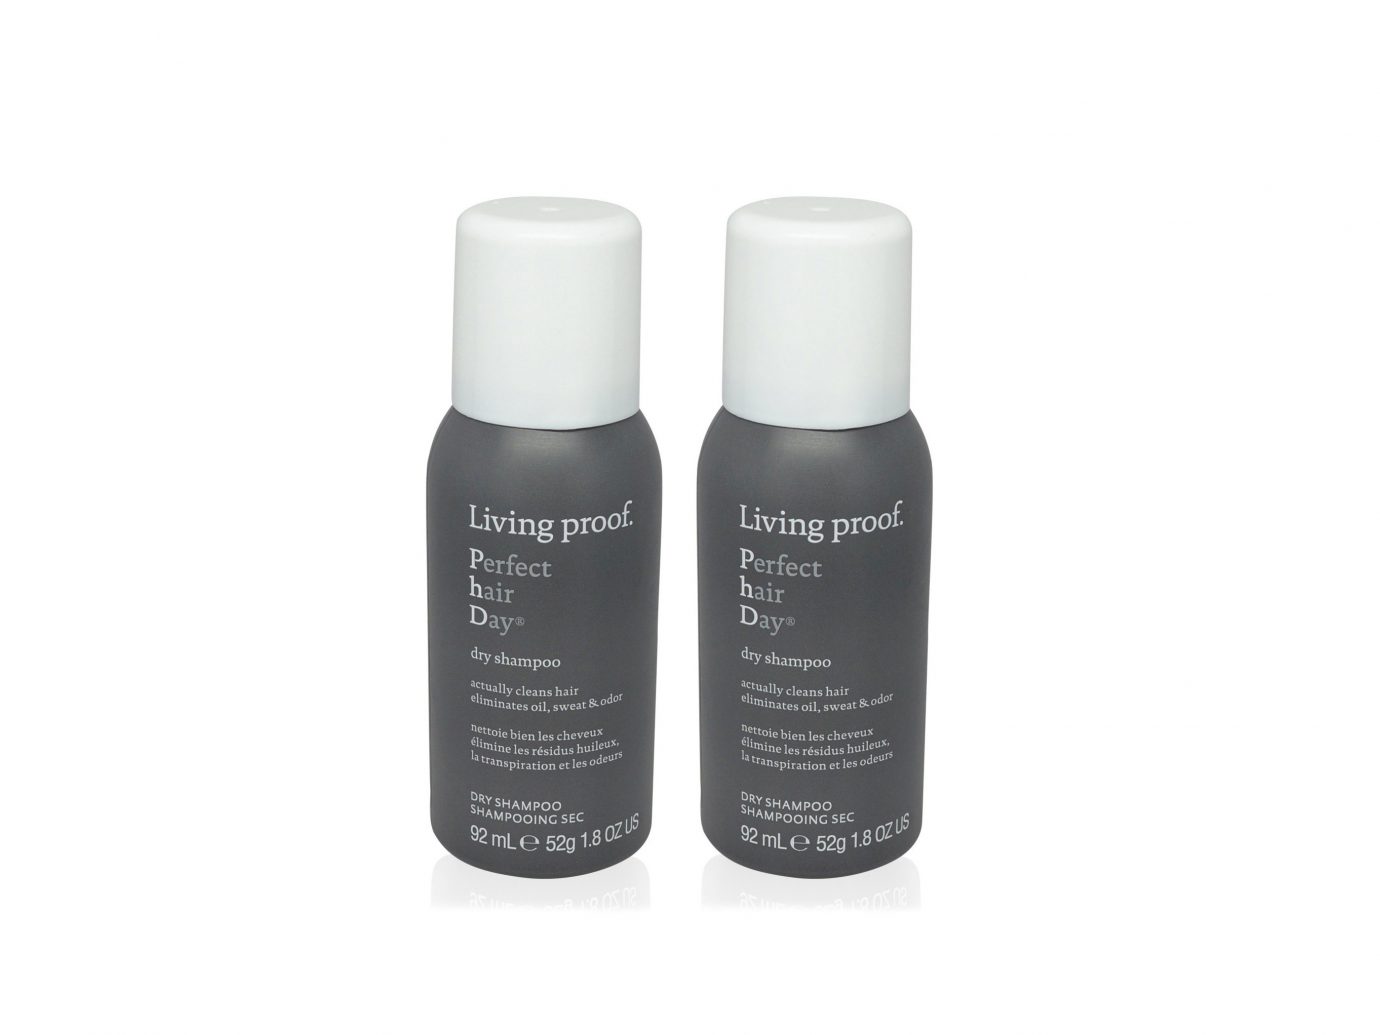 Living Proof Perfect Hair Day Travel Size Dry Shampoo